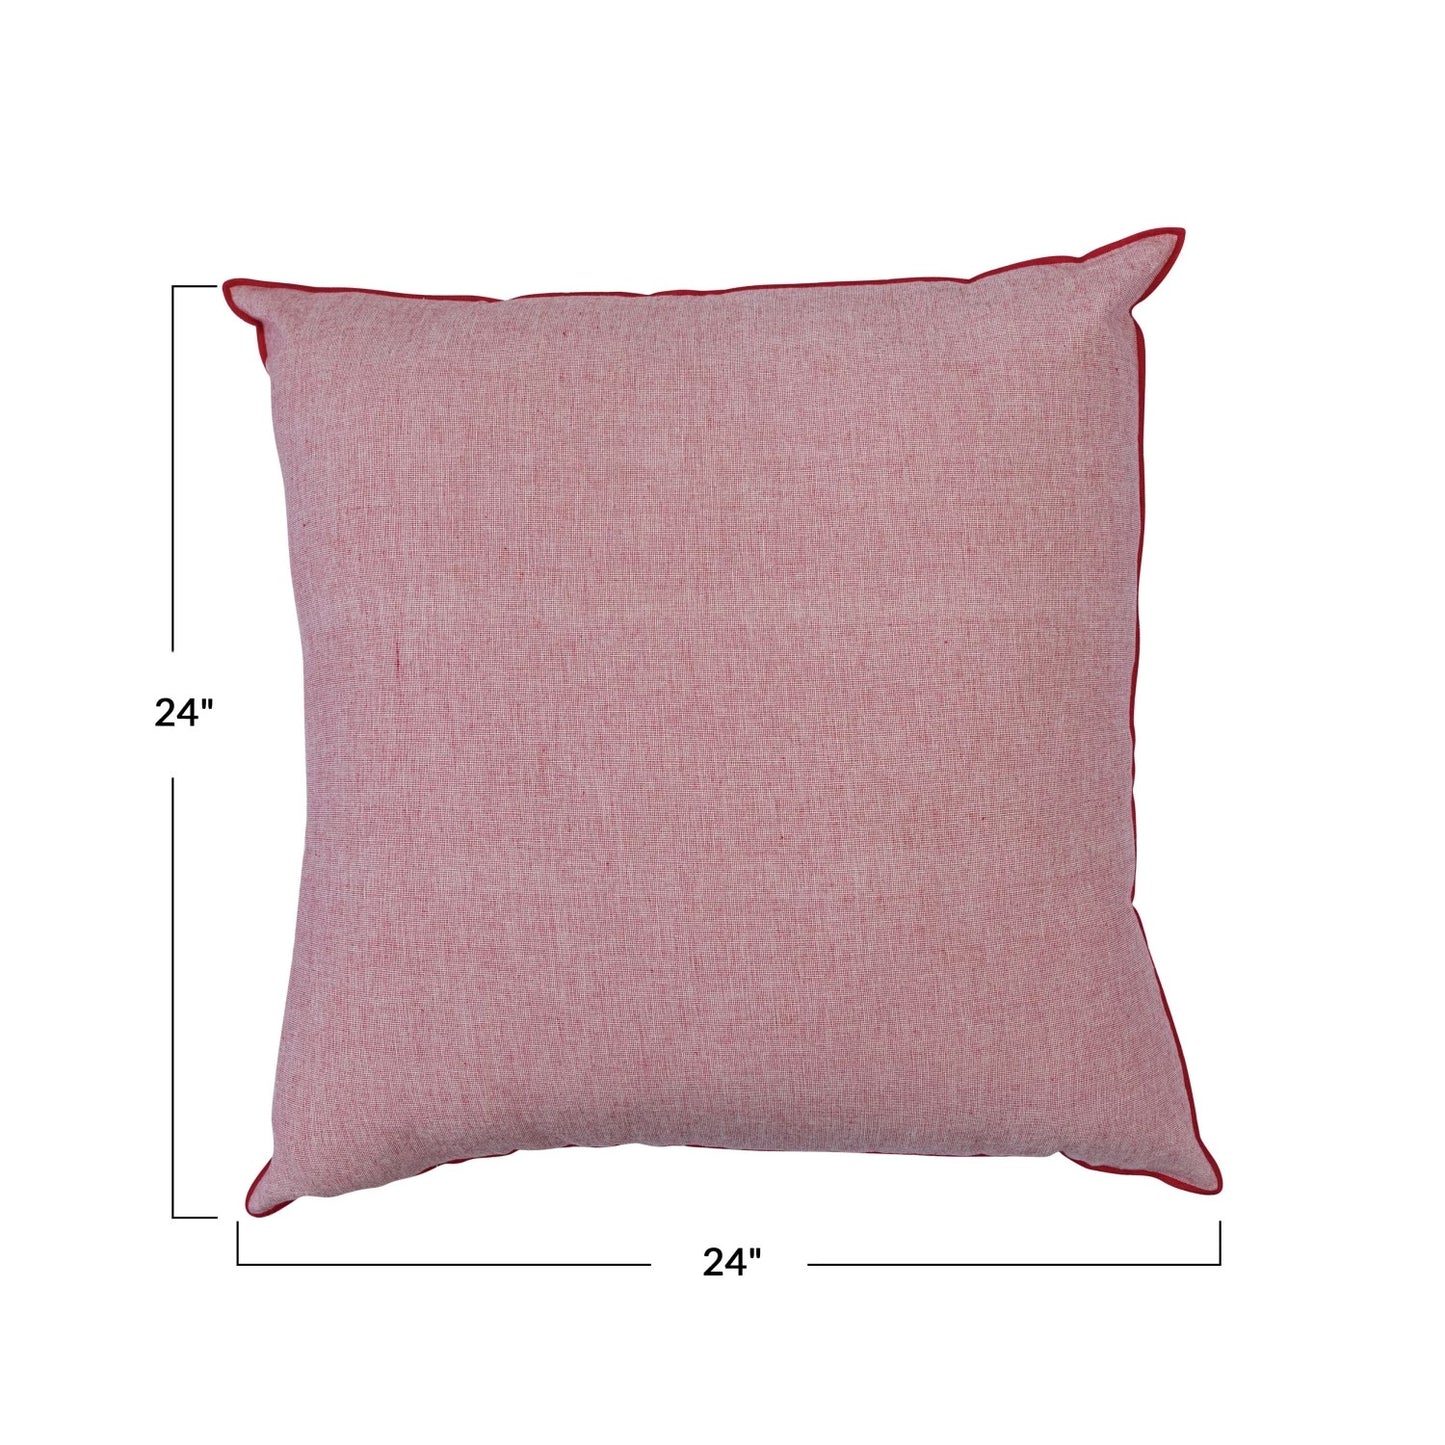 Red Woven Cotton Pillow